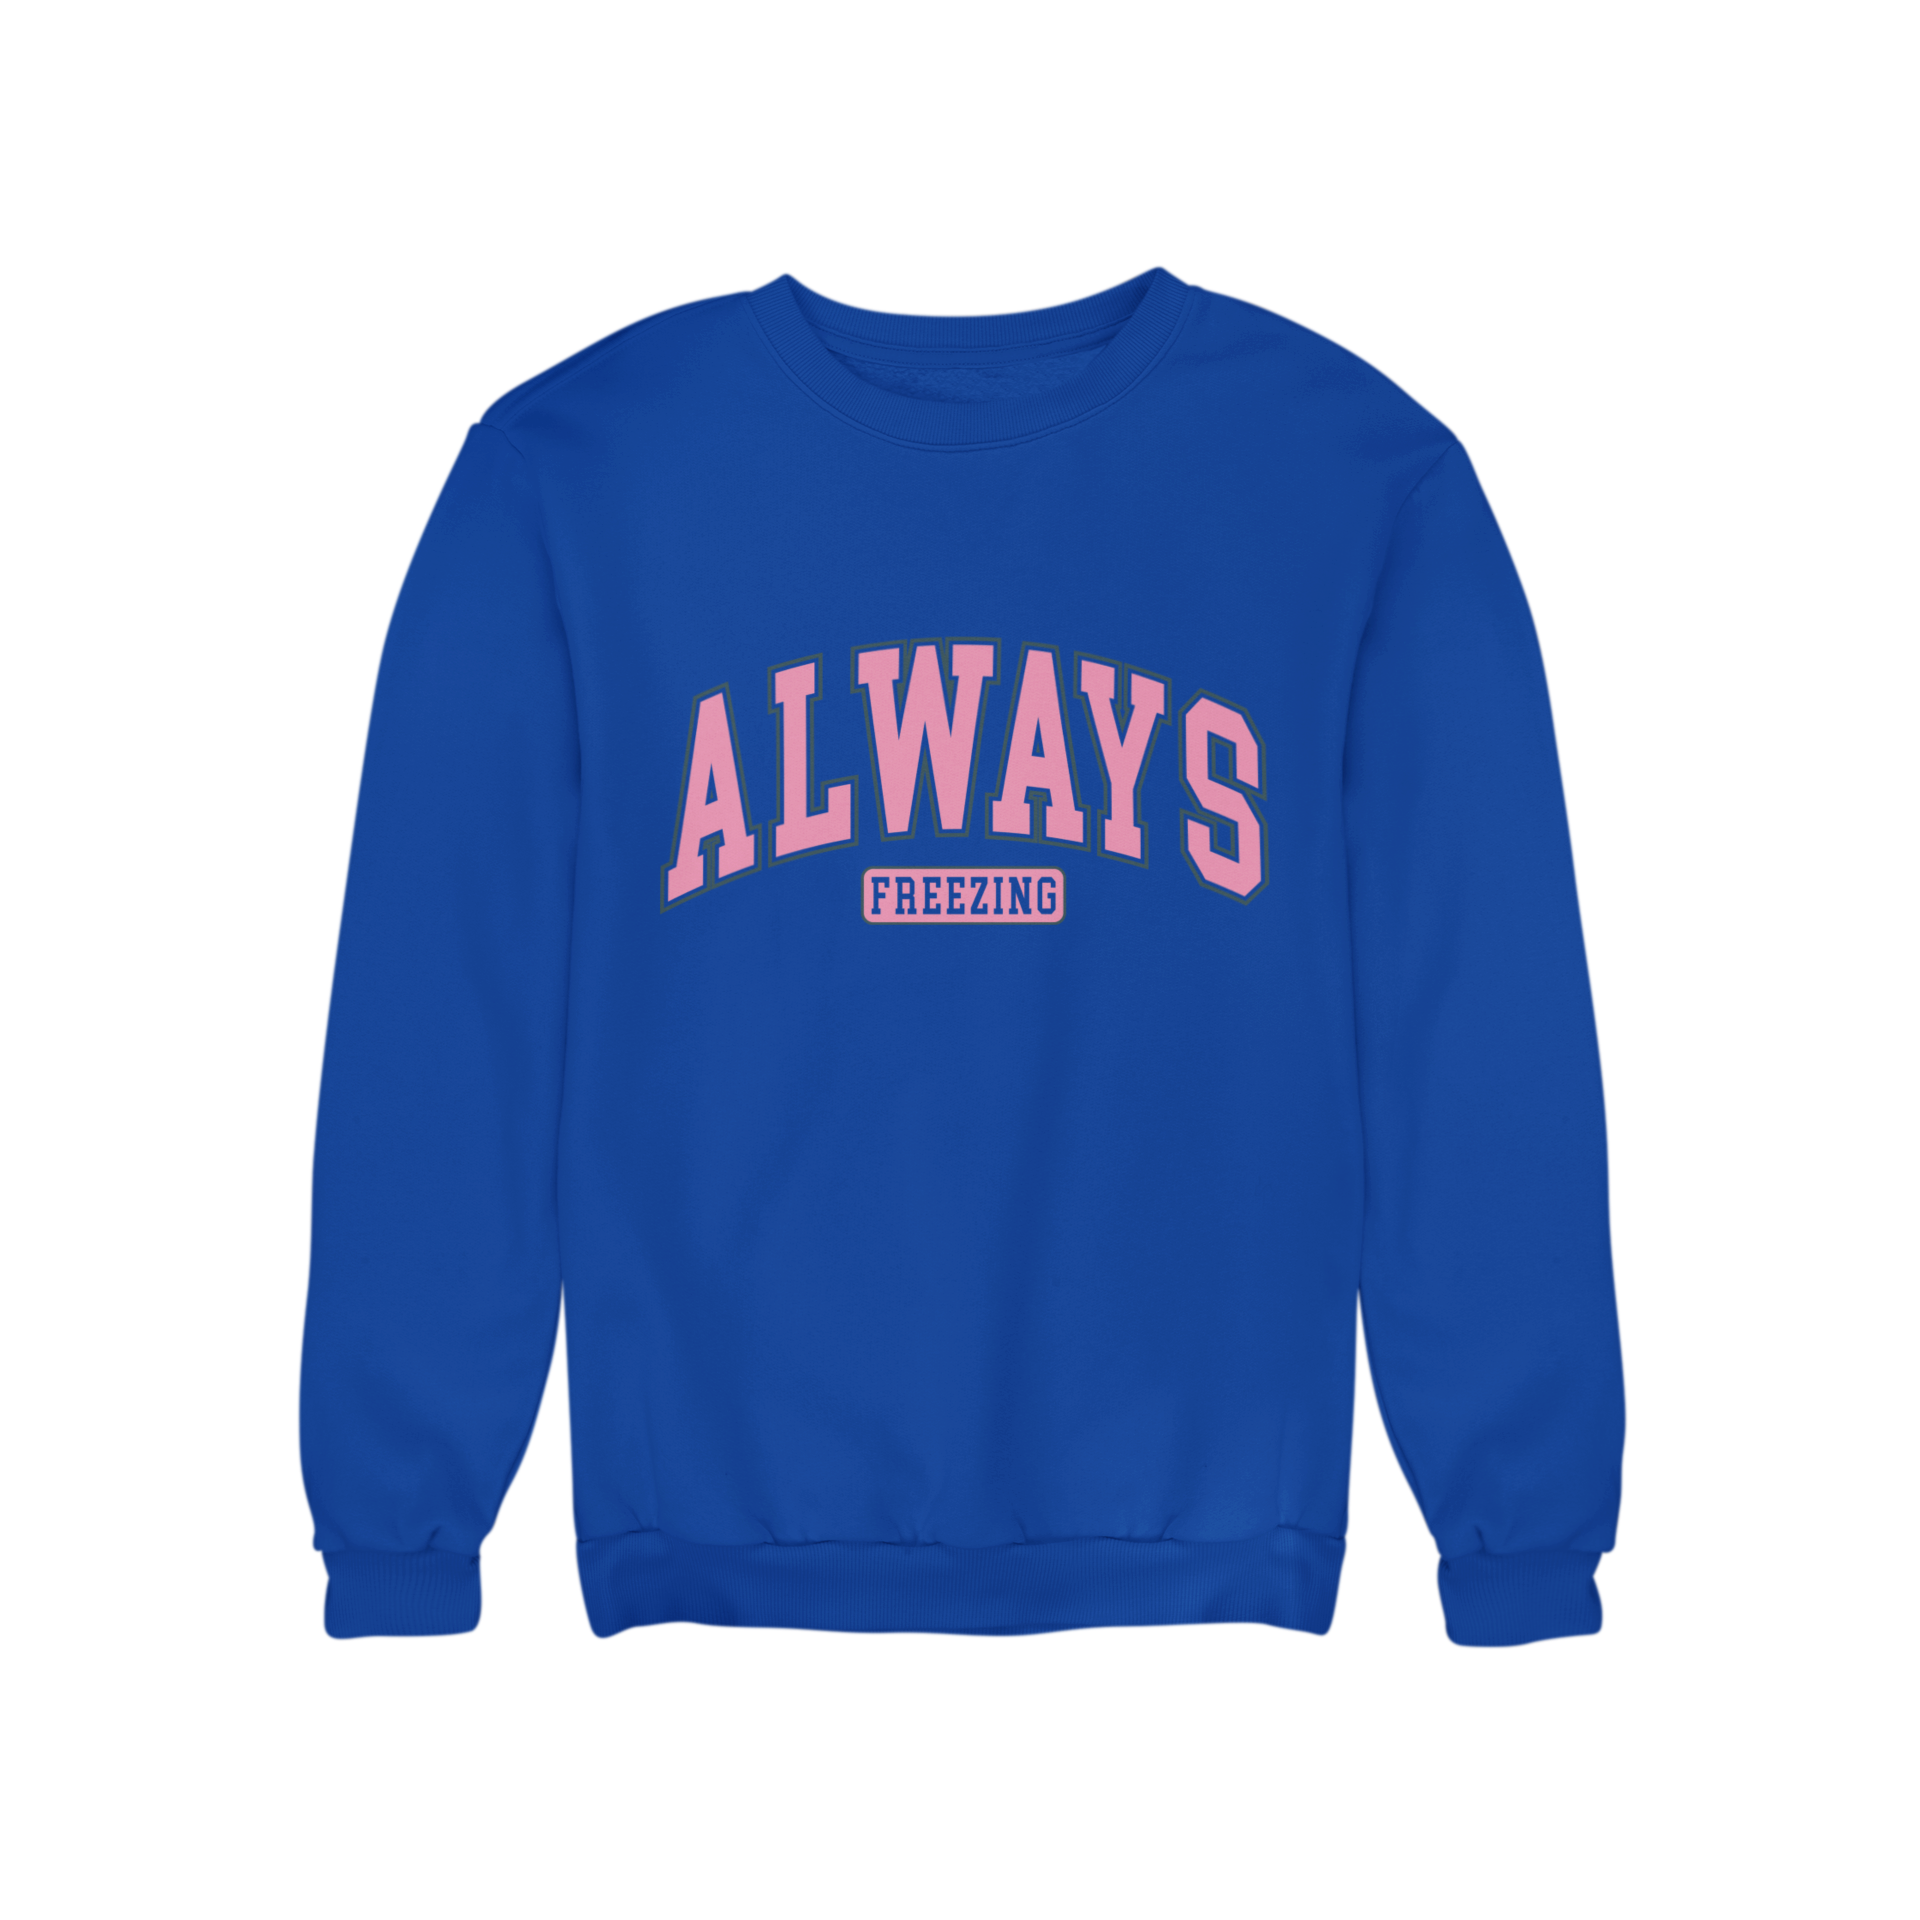 The Always Freezing 2 Jumper features a slogan sweatshirt, with a trendy and eye-catching pink print. This quality and stylish jumper is sure to keep you warm and looking sharp.